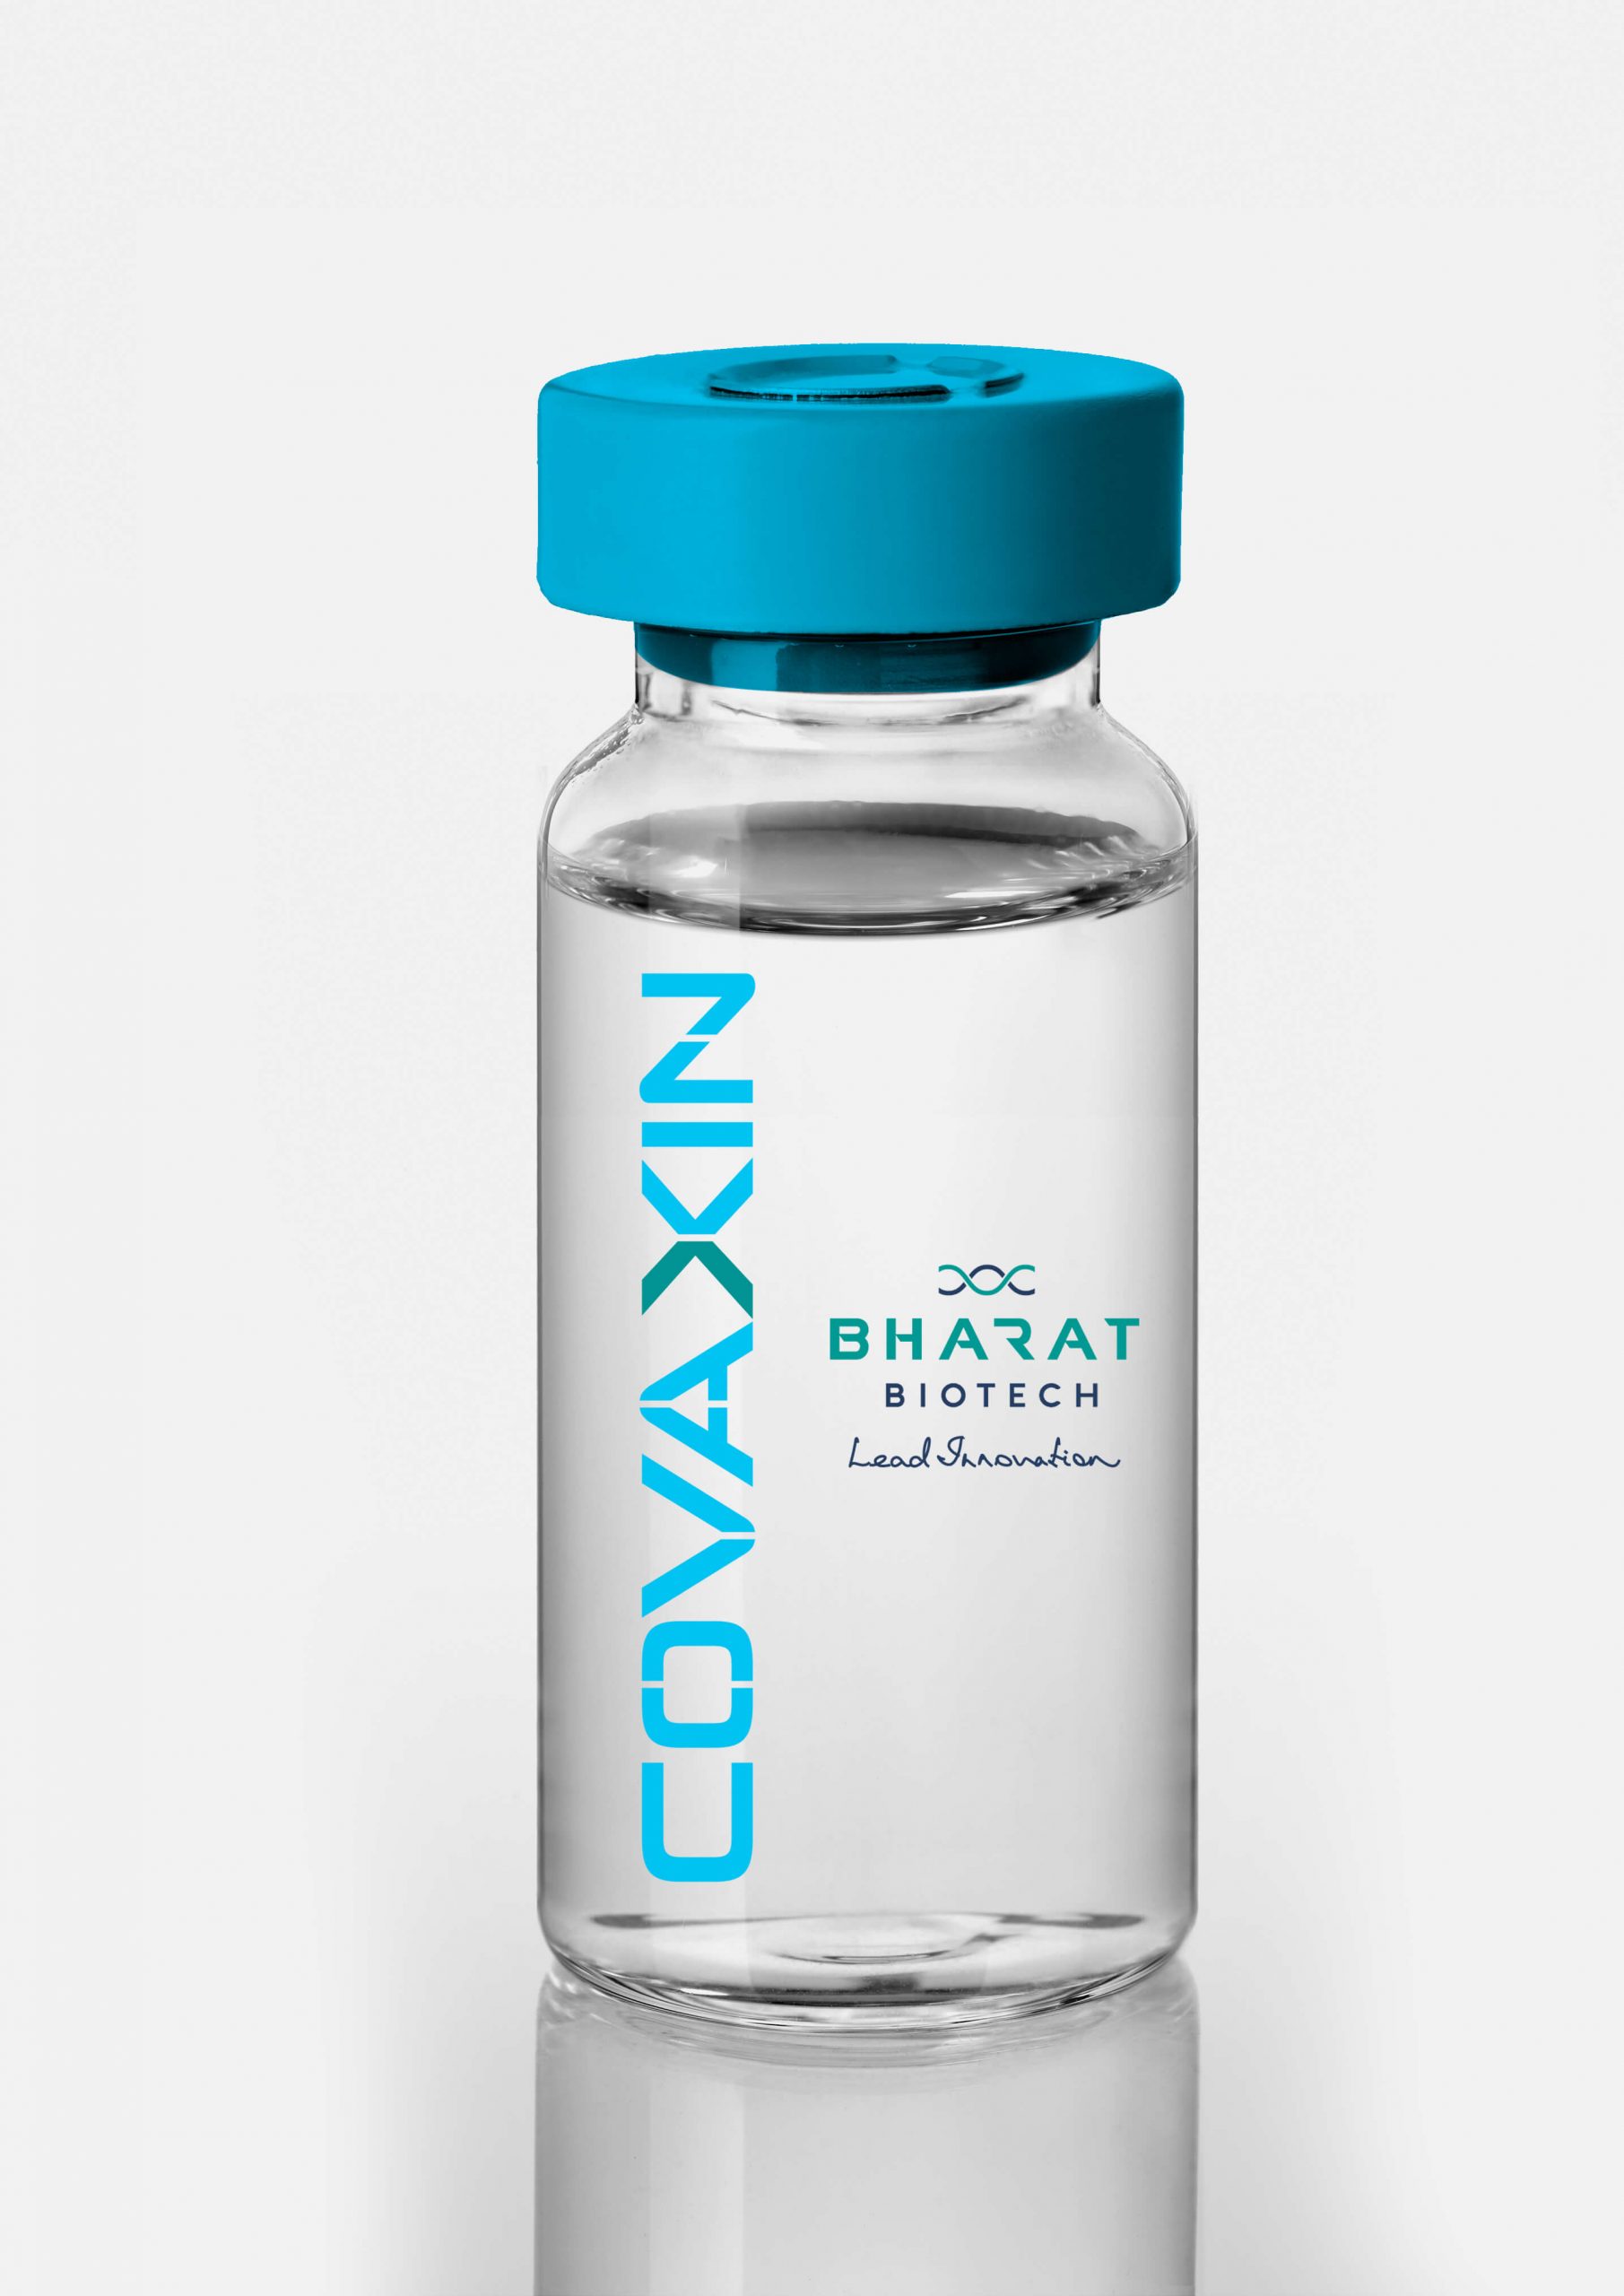 Covaxin vaccine is 77.8 percent effective, claims Bharat Biotech